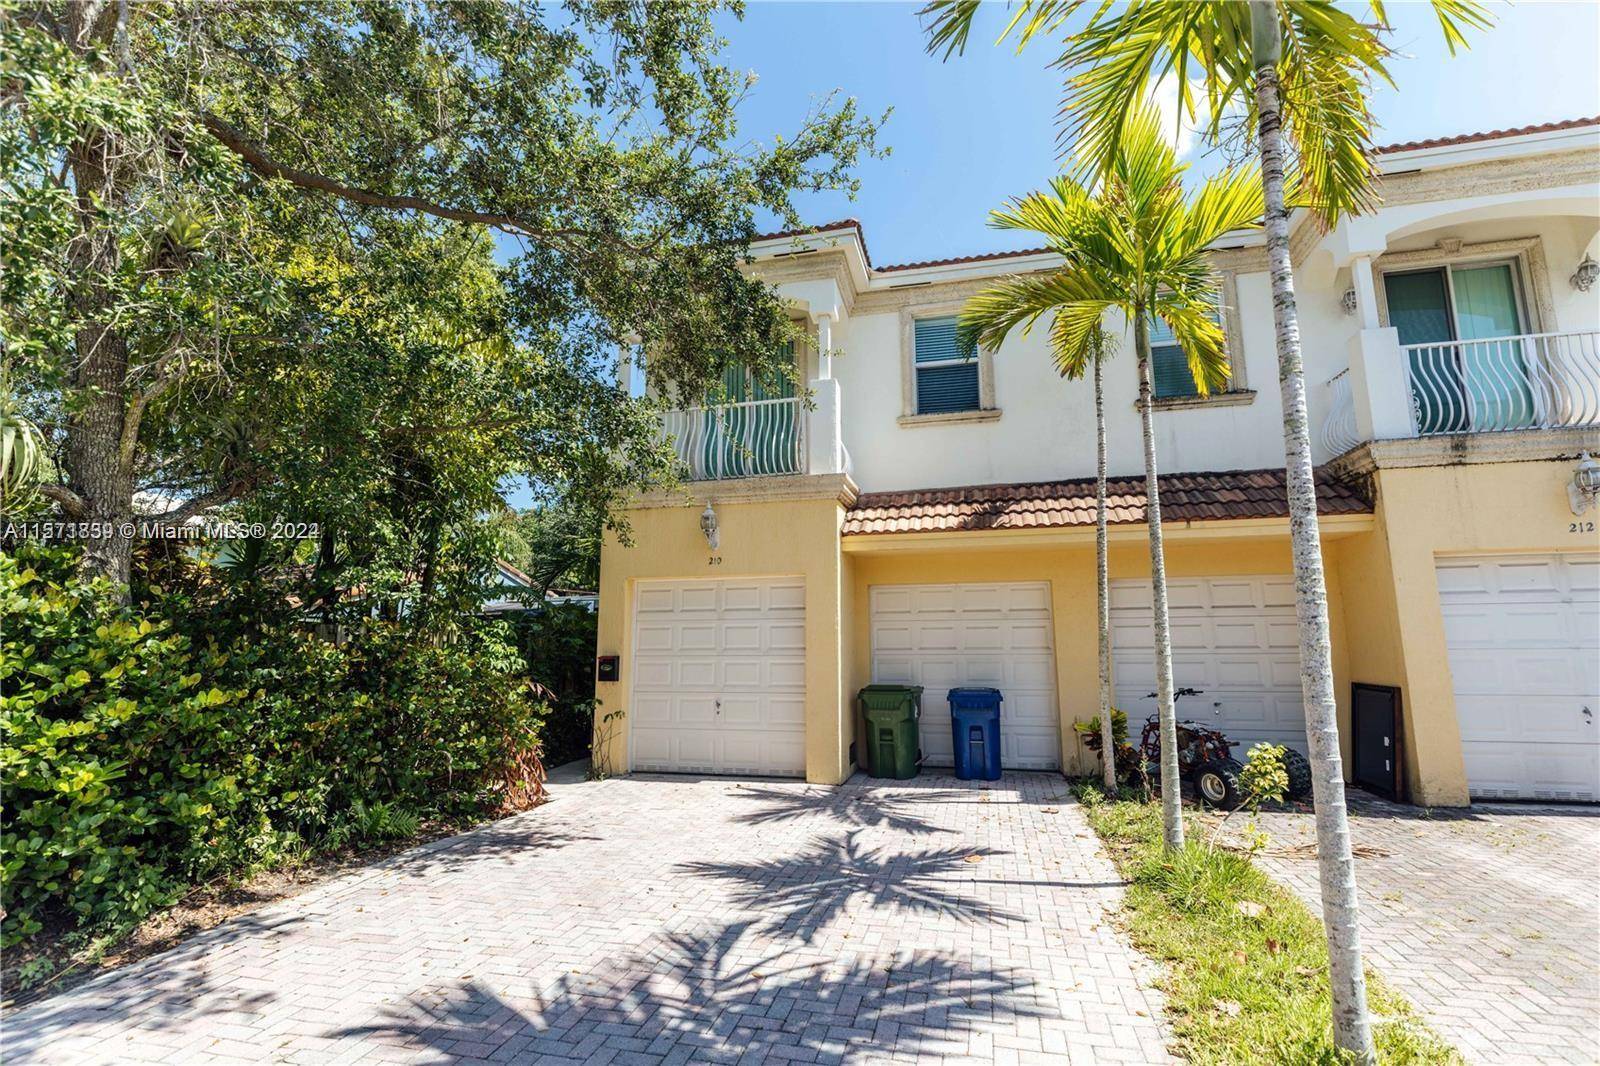 SPACIOUS 3 BED, 3, 5 BATHROOM TOWN HOUSE BUILT IN 2007 LOCATED IN DOWNTOWN FT LAUDERDALE, DUAL MASTER BEDROOM SUITES WITH BATHROOMS.